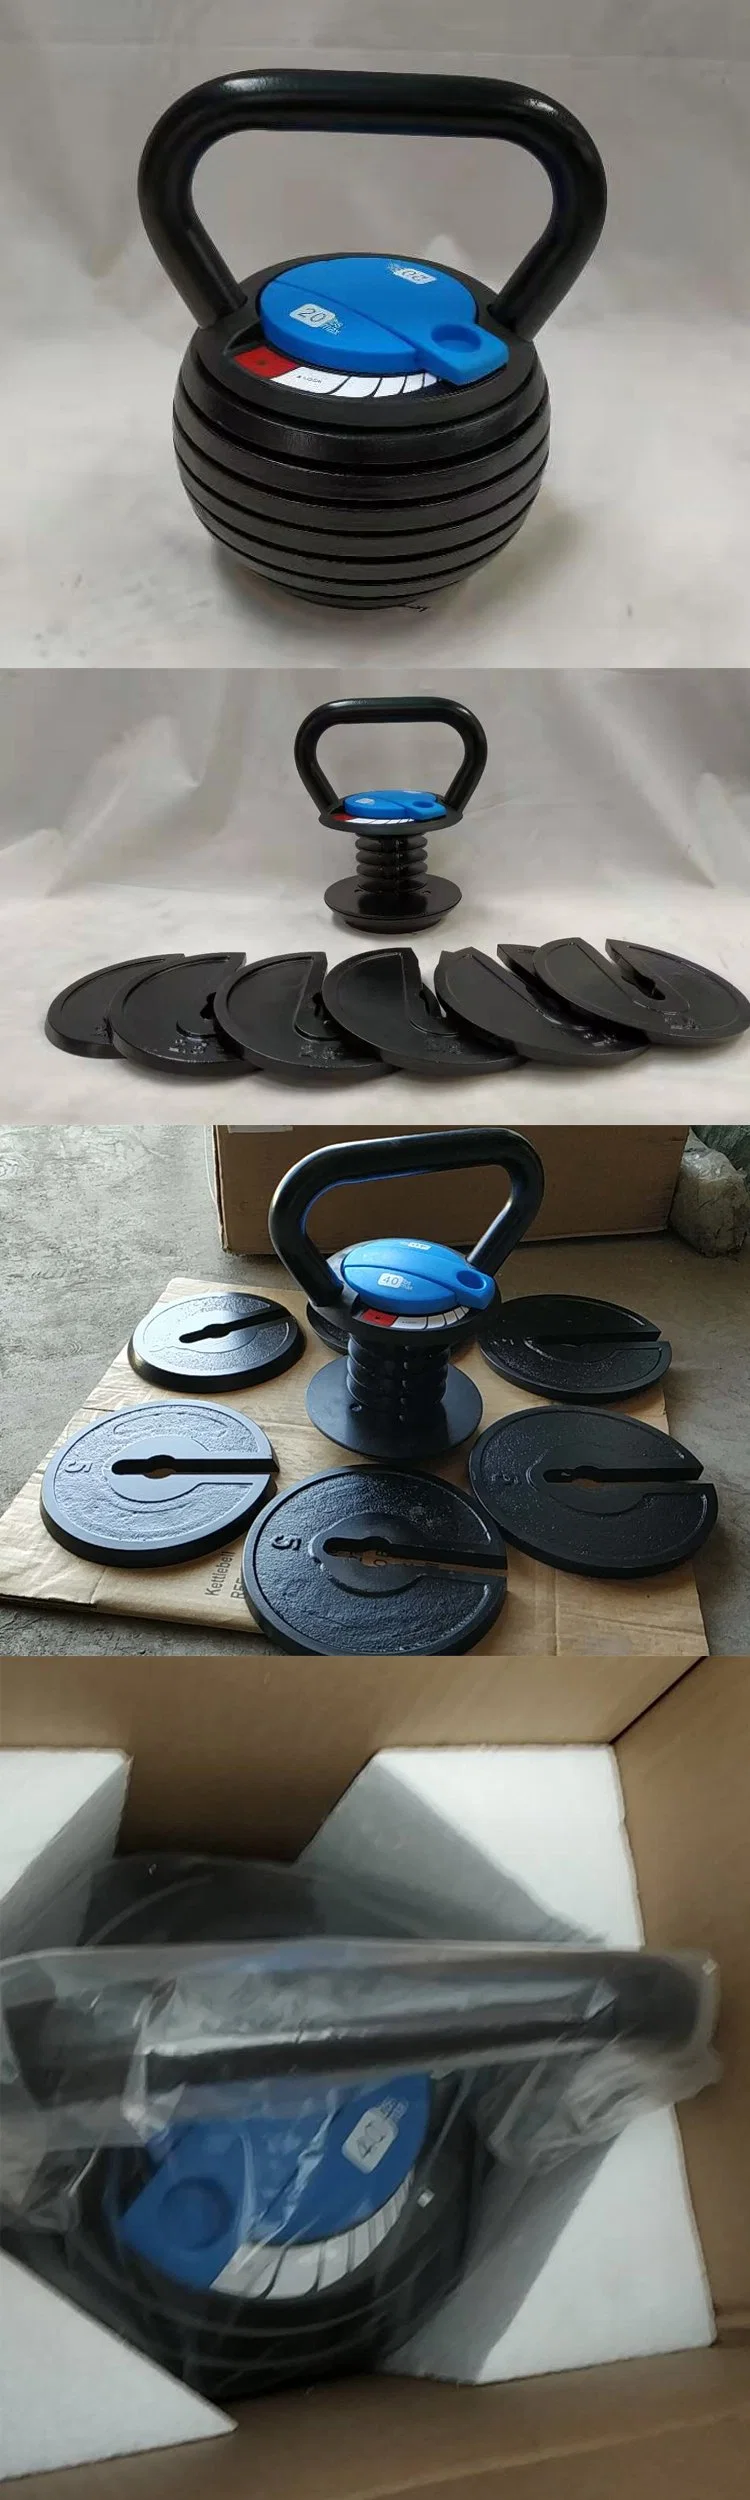 China Gold Supplier Best Price Vinyl Coated Cast Iron Kettlebells Weighting Lifting Kettle Bell